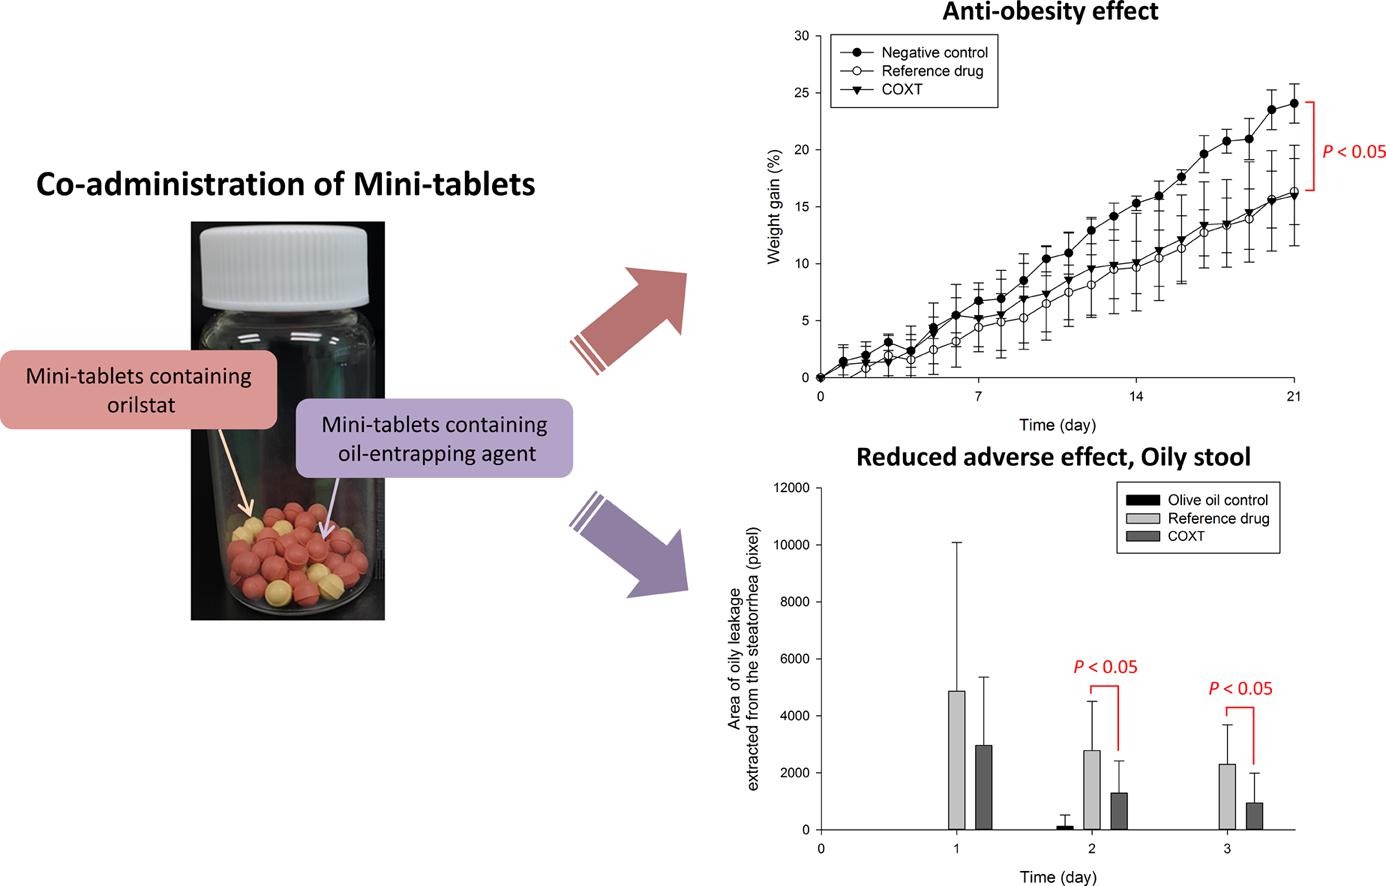 Co-administration of mini-tablets orlistat and xanthan gum